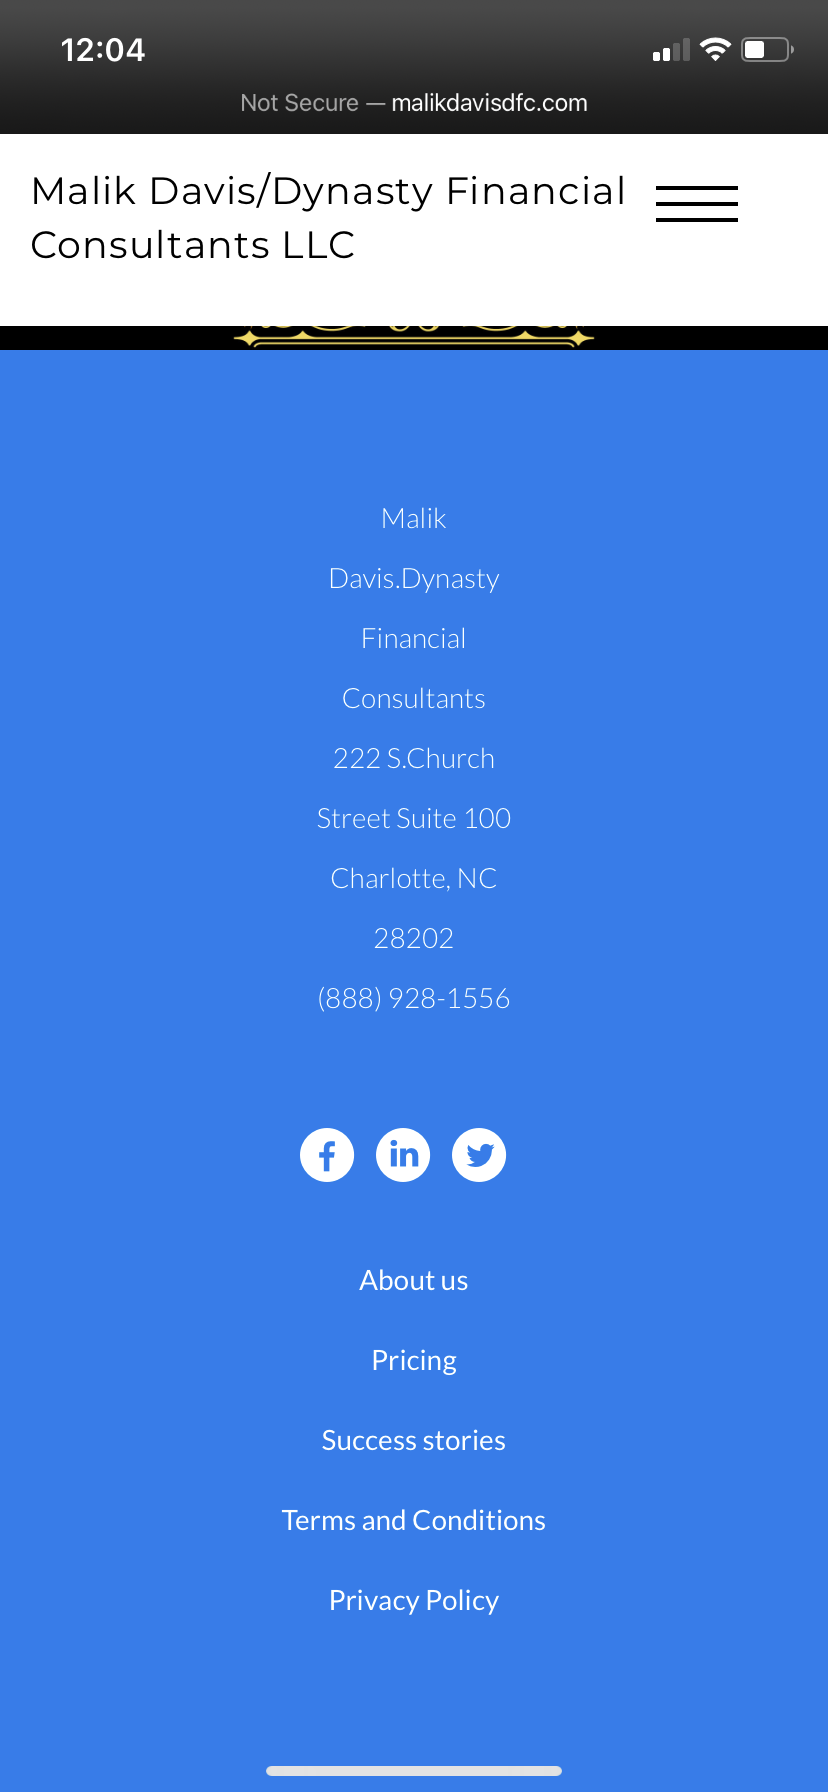 Contact page of the same site